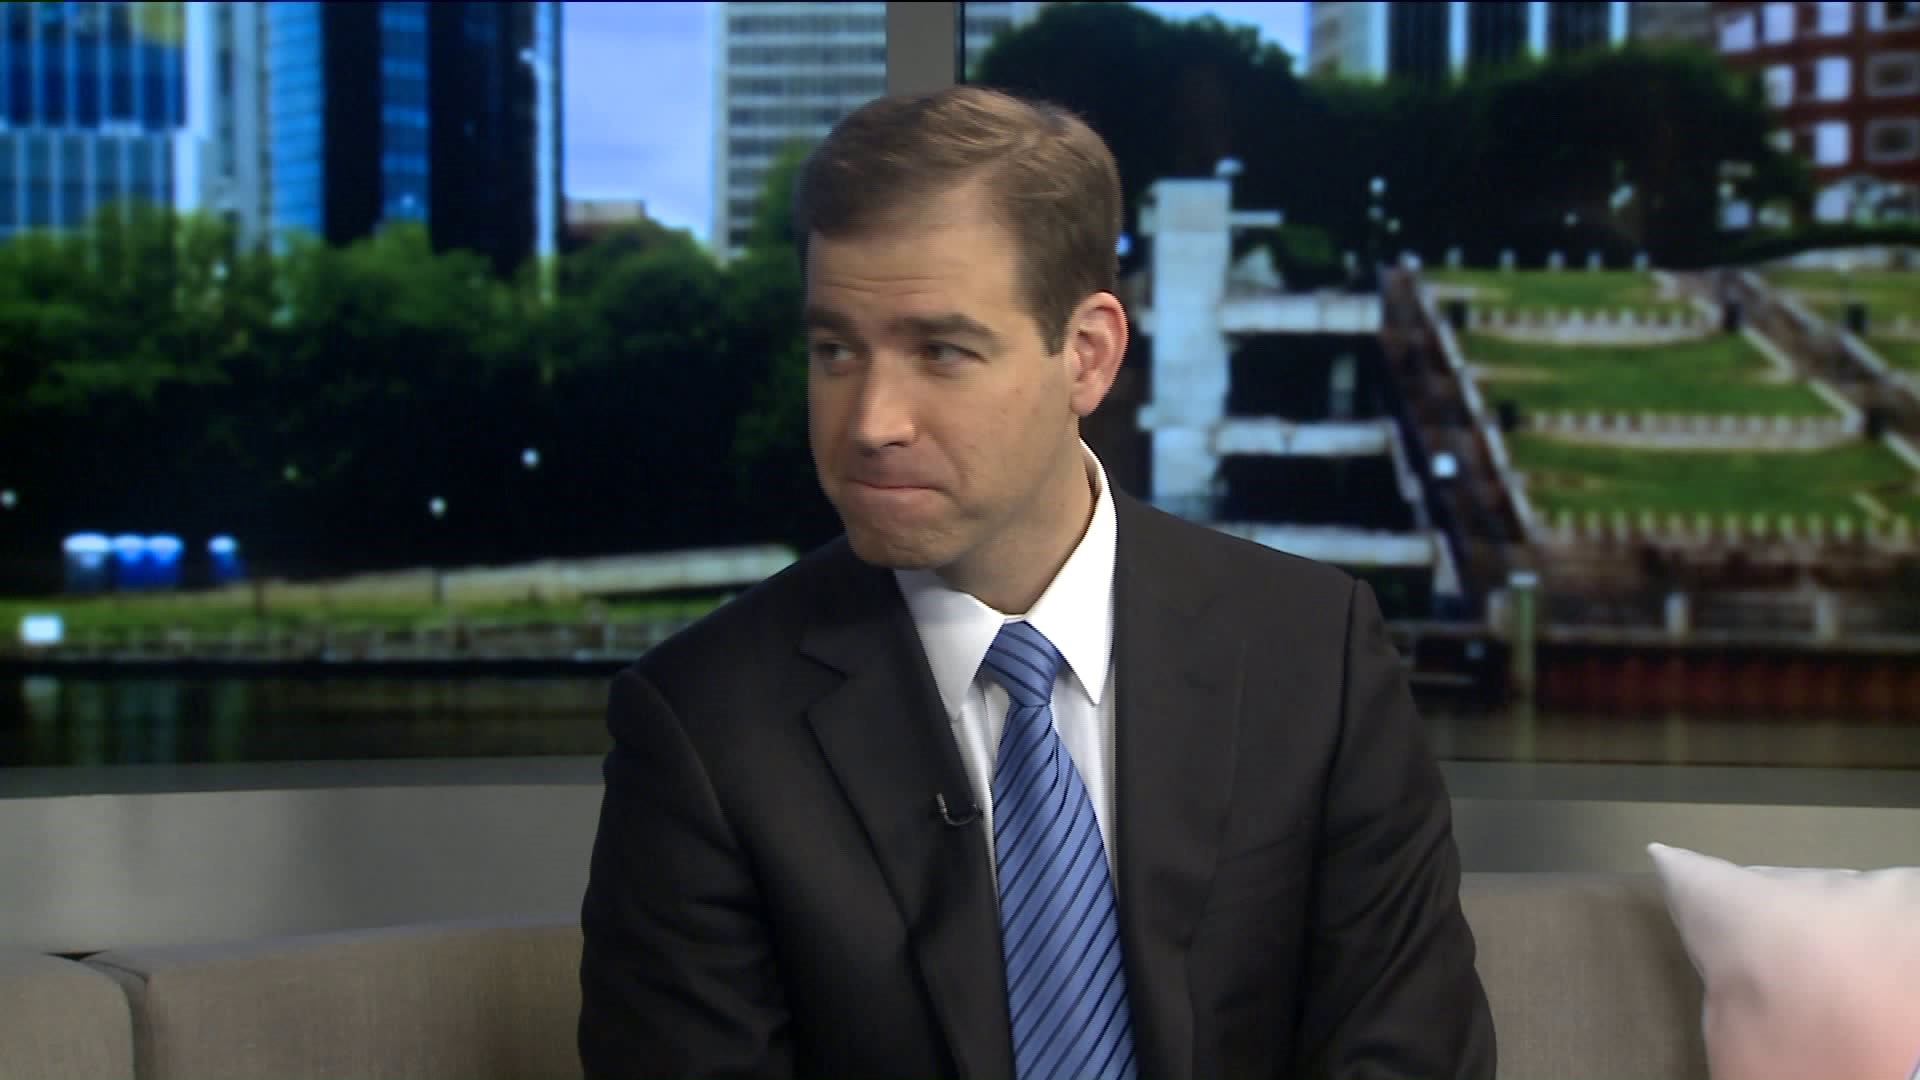 Interview with Mayor Bronin